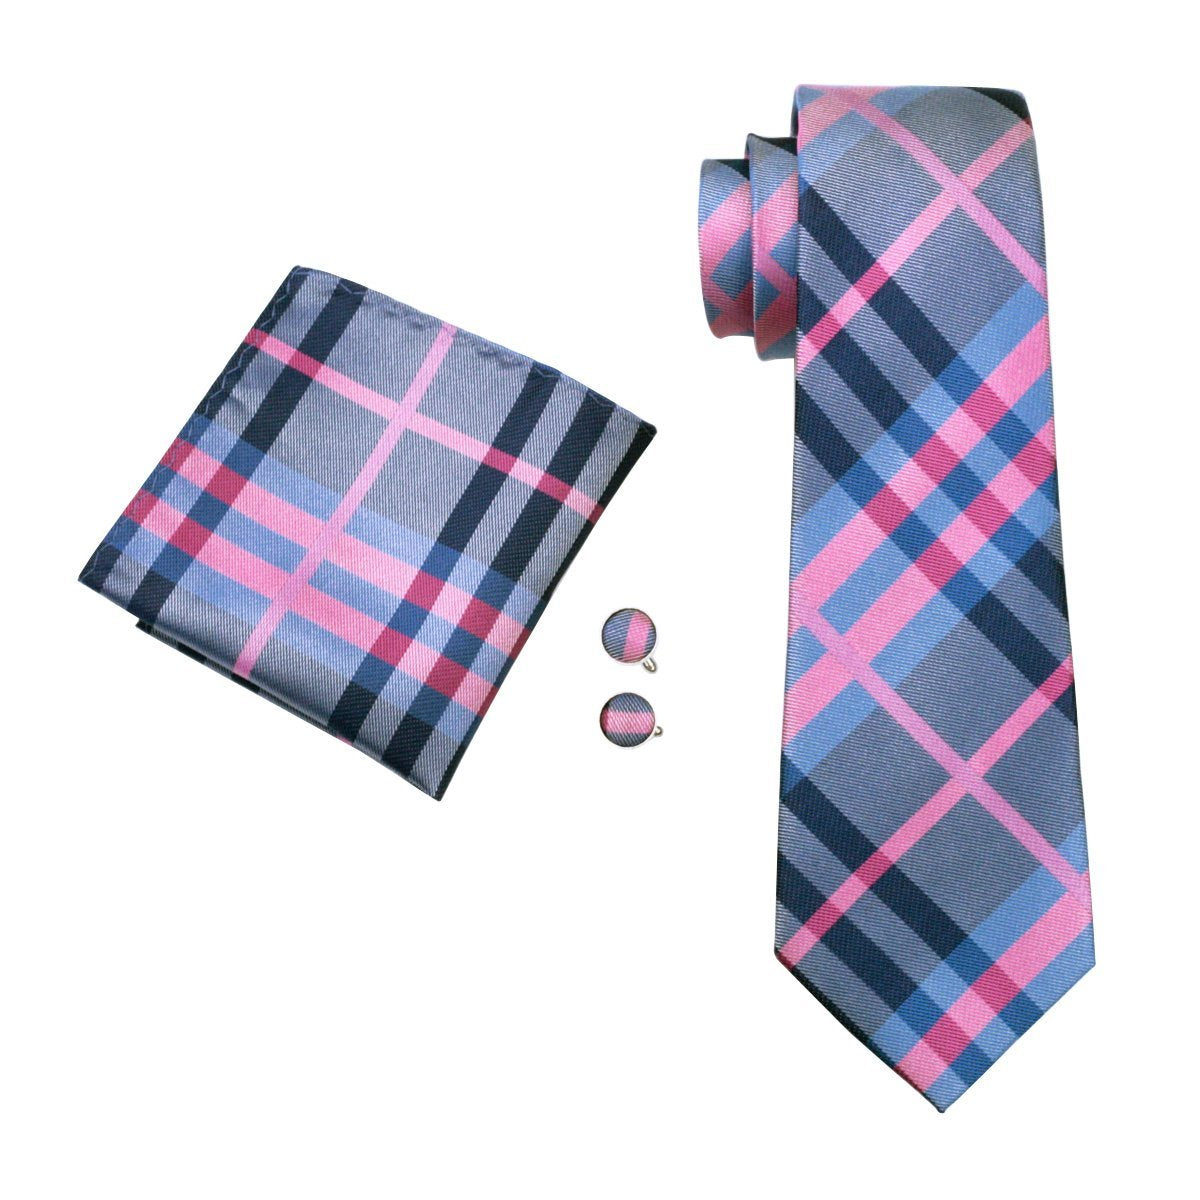 Pink Blue Grey Plaid 70 Inches Extra Long Tie Pocket Square Cufflinks Set with Brooch